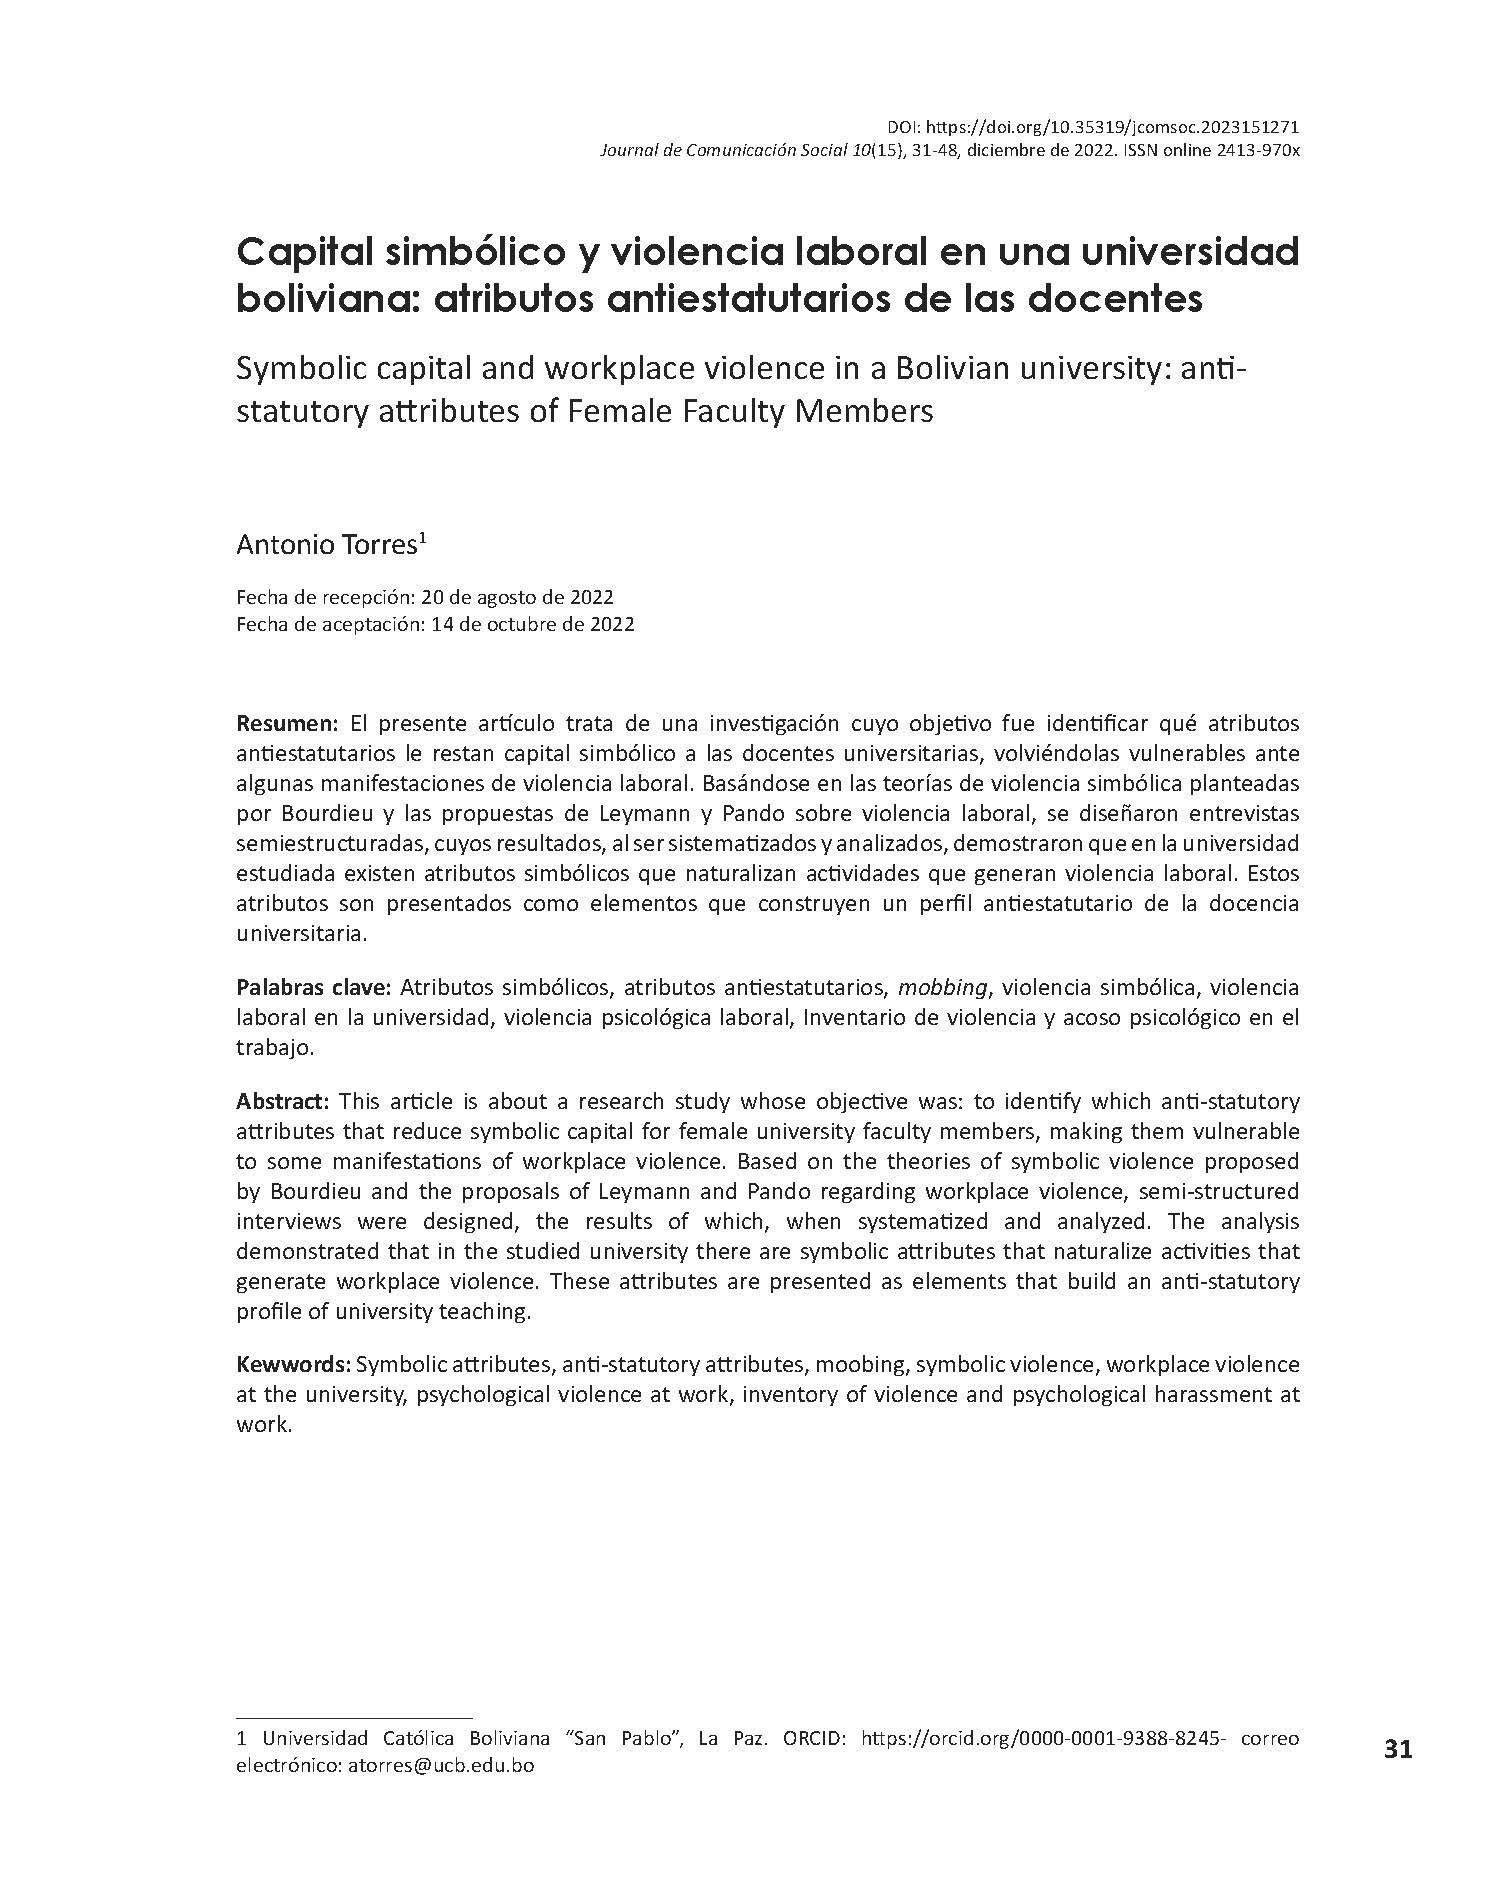 Symbolic capital and workplace violence in a Bolivian university: antistatutory attributes of Female Faculty Members